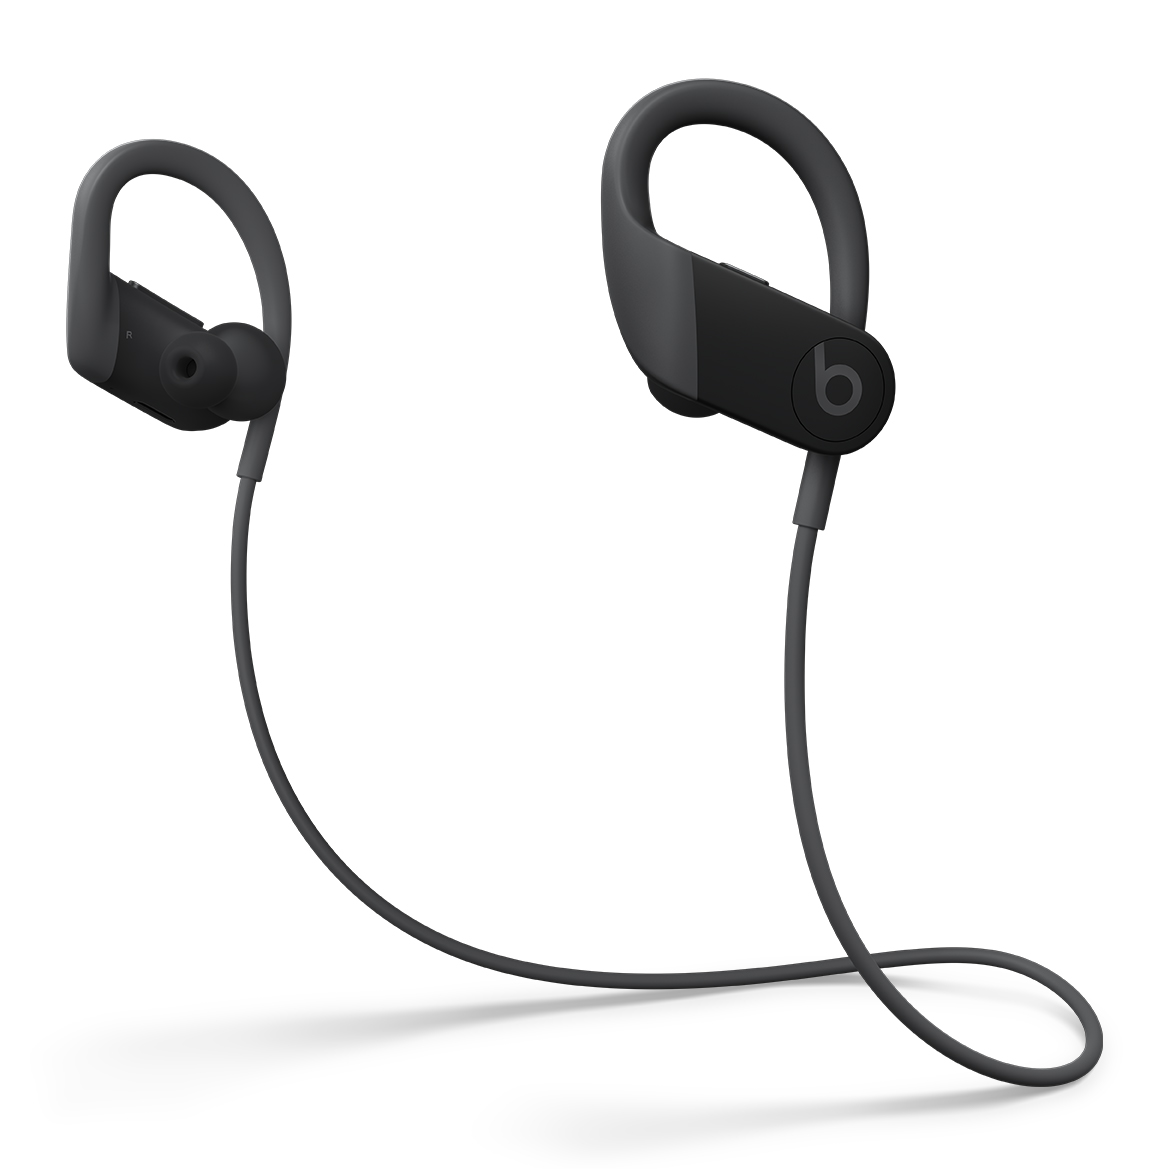 New Powerbeats Wireless Earphones Now Available to Order